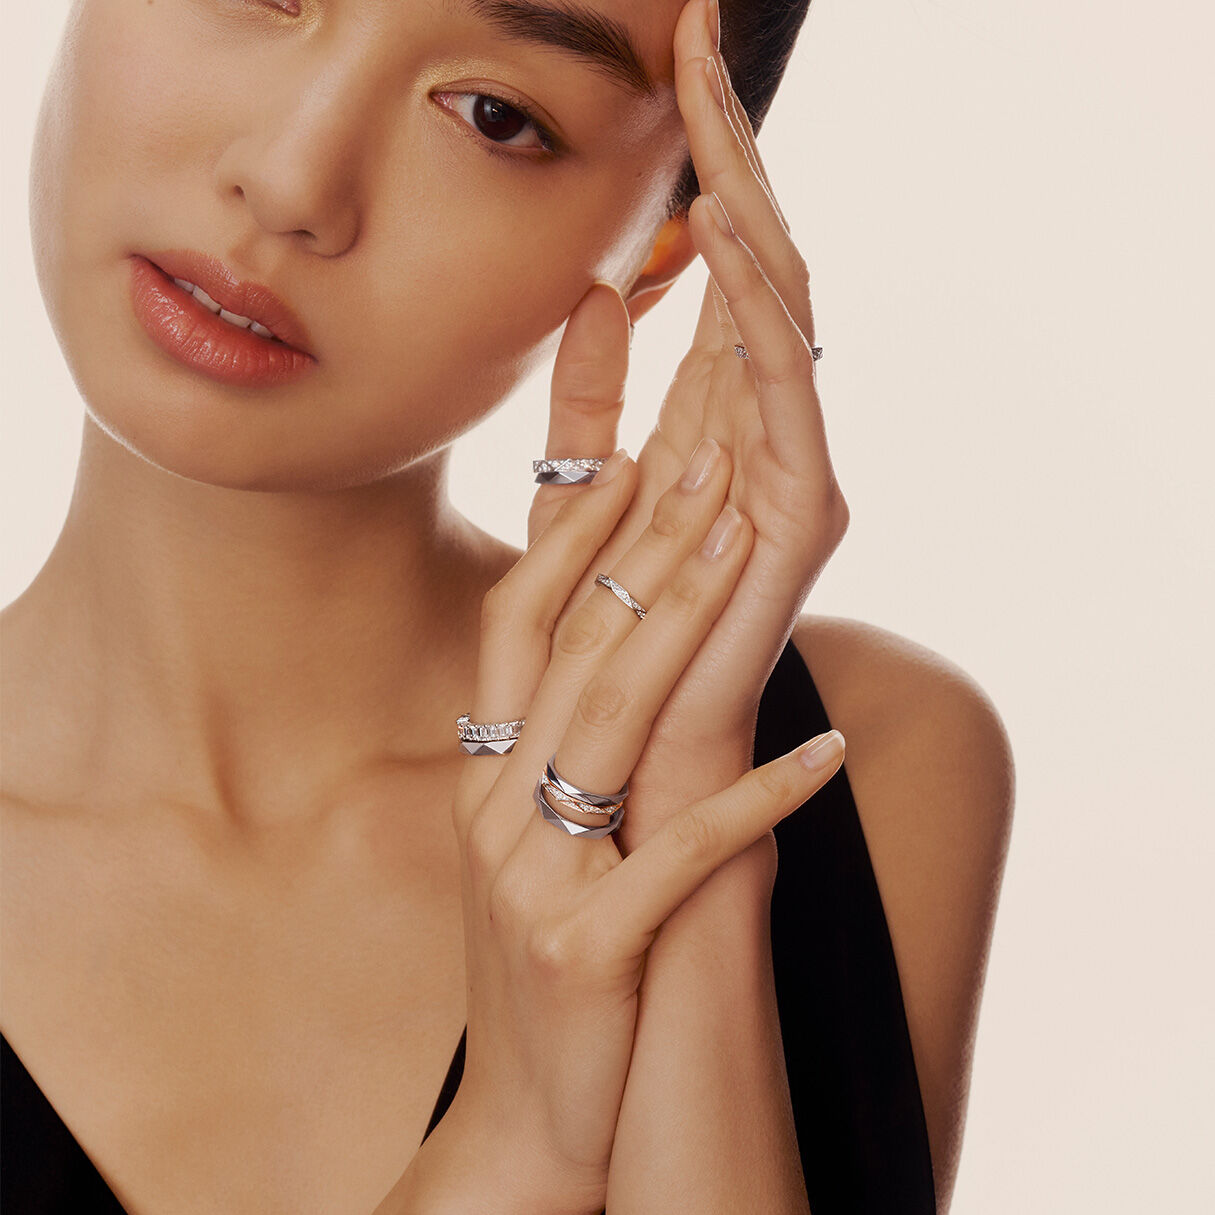 Graff Essentials, model wears a variety of plain and white diamond rings